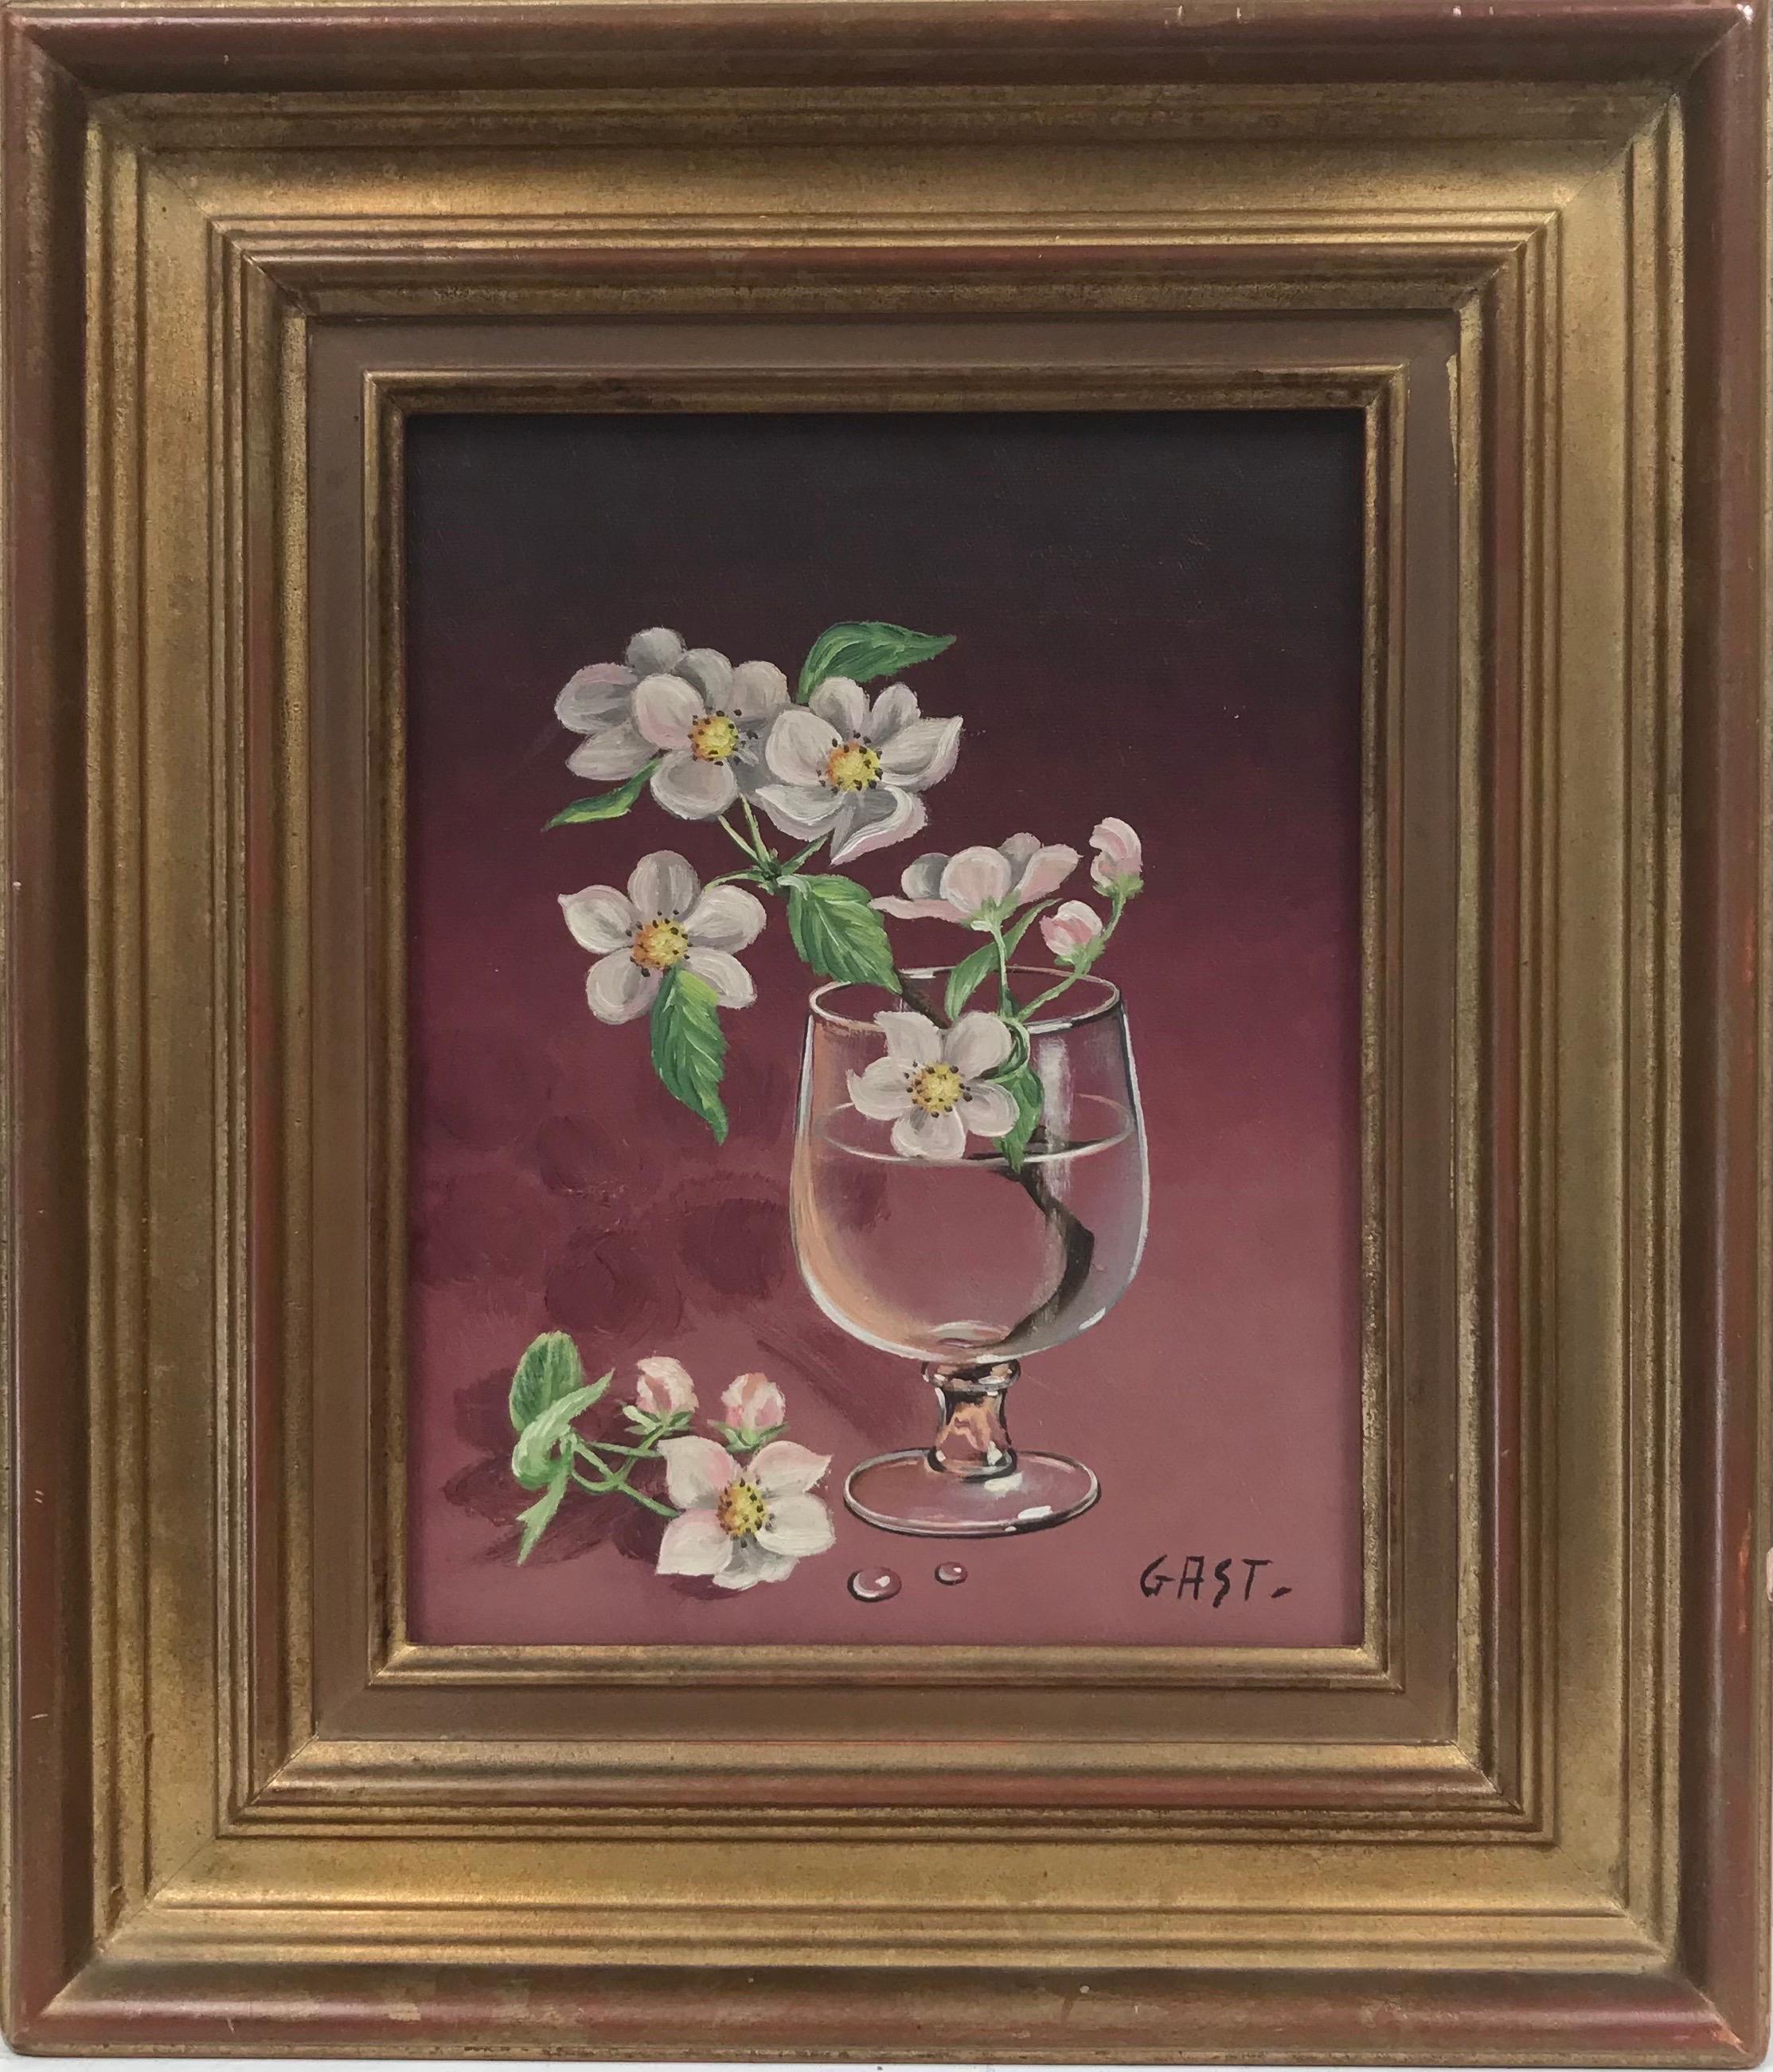 Artist/ School: signed lower right corner, Italian School, 20th century

Title: sprig of blossom in a clear glass with water. 

Medium: oil painting on canvas, framed 

Size:
framed: 14 x 12.5 inches
painting: 9.5 x 8 inches

Provenance: private